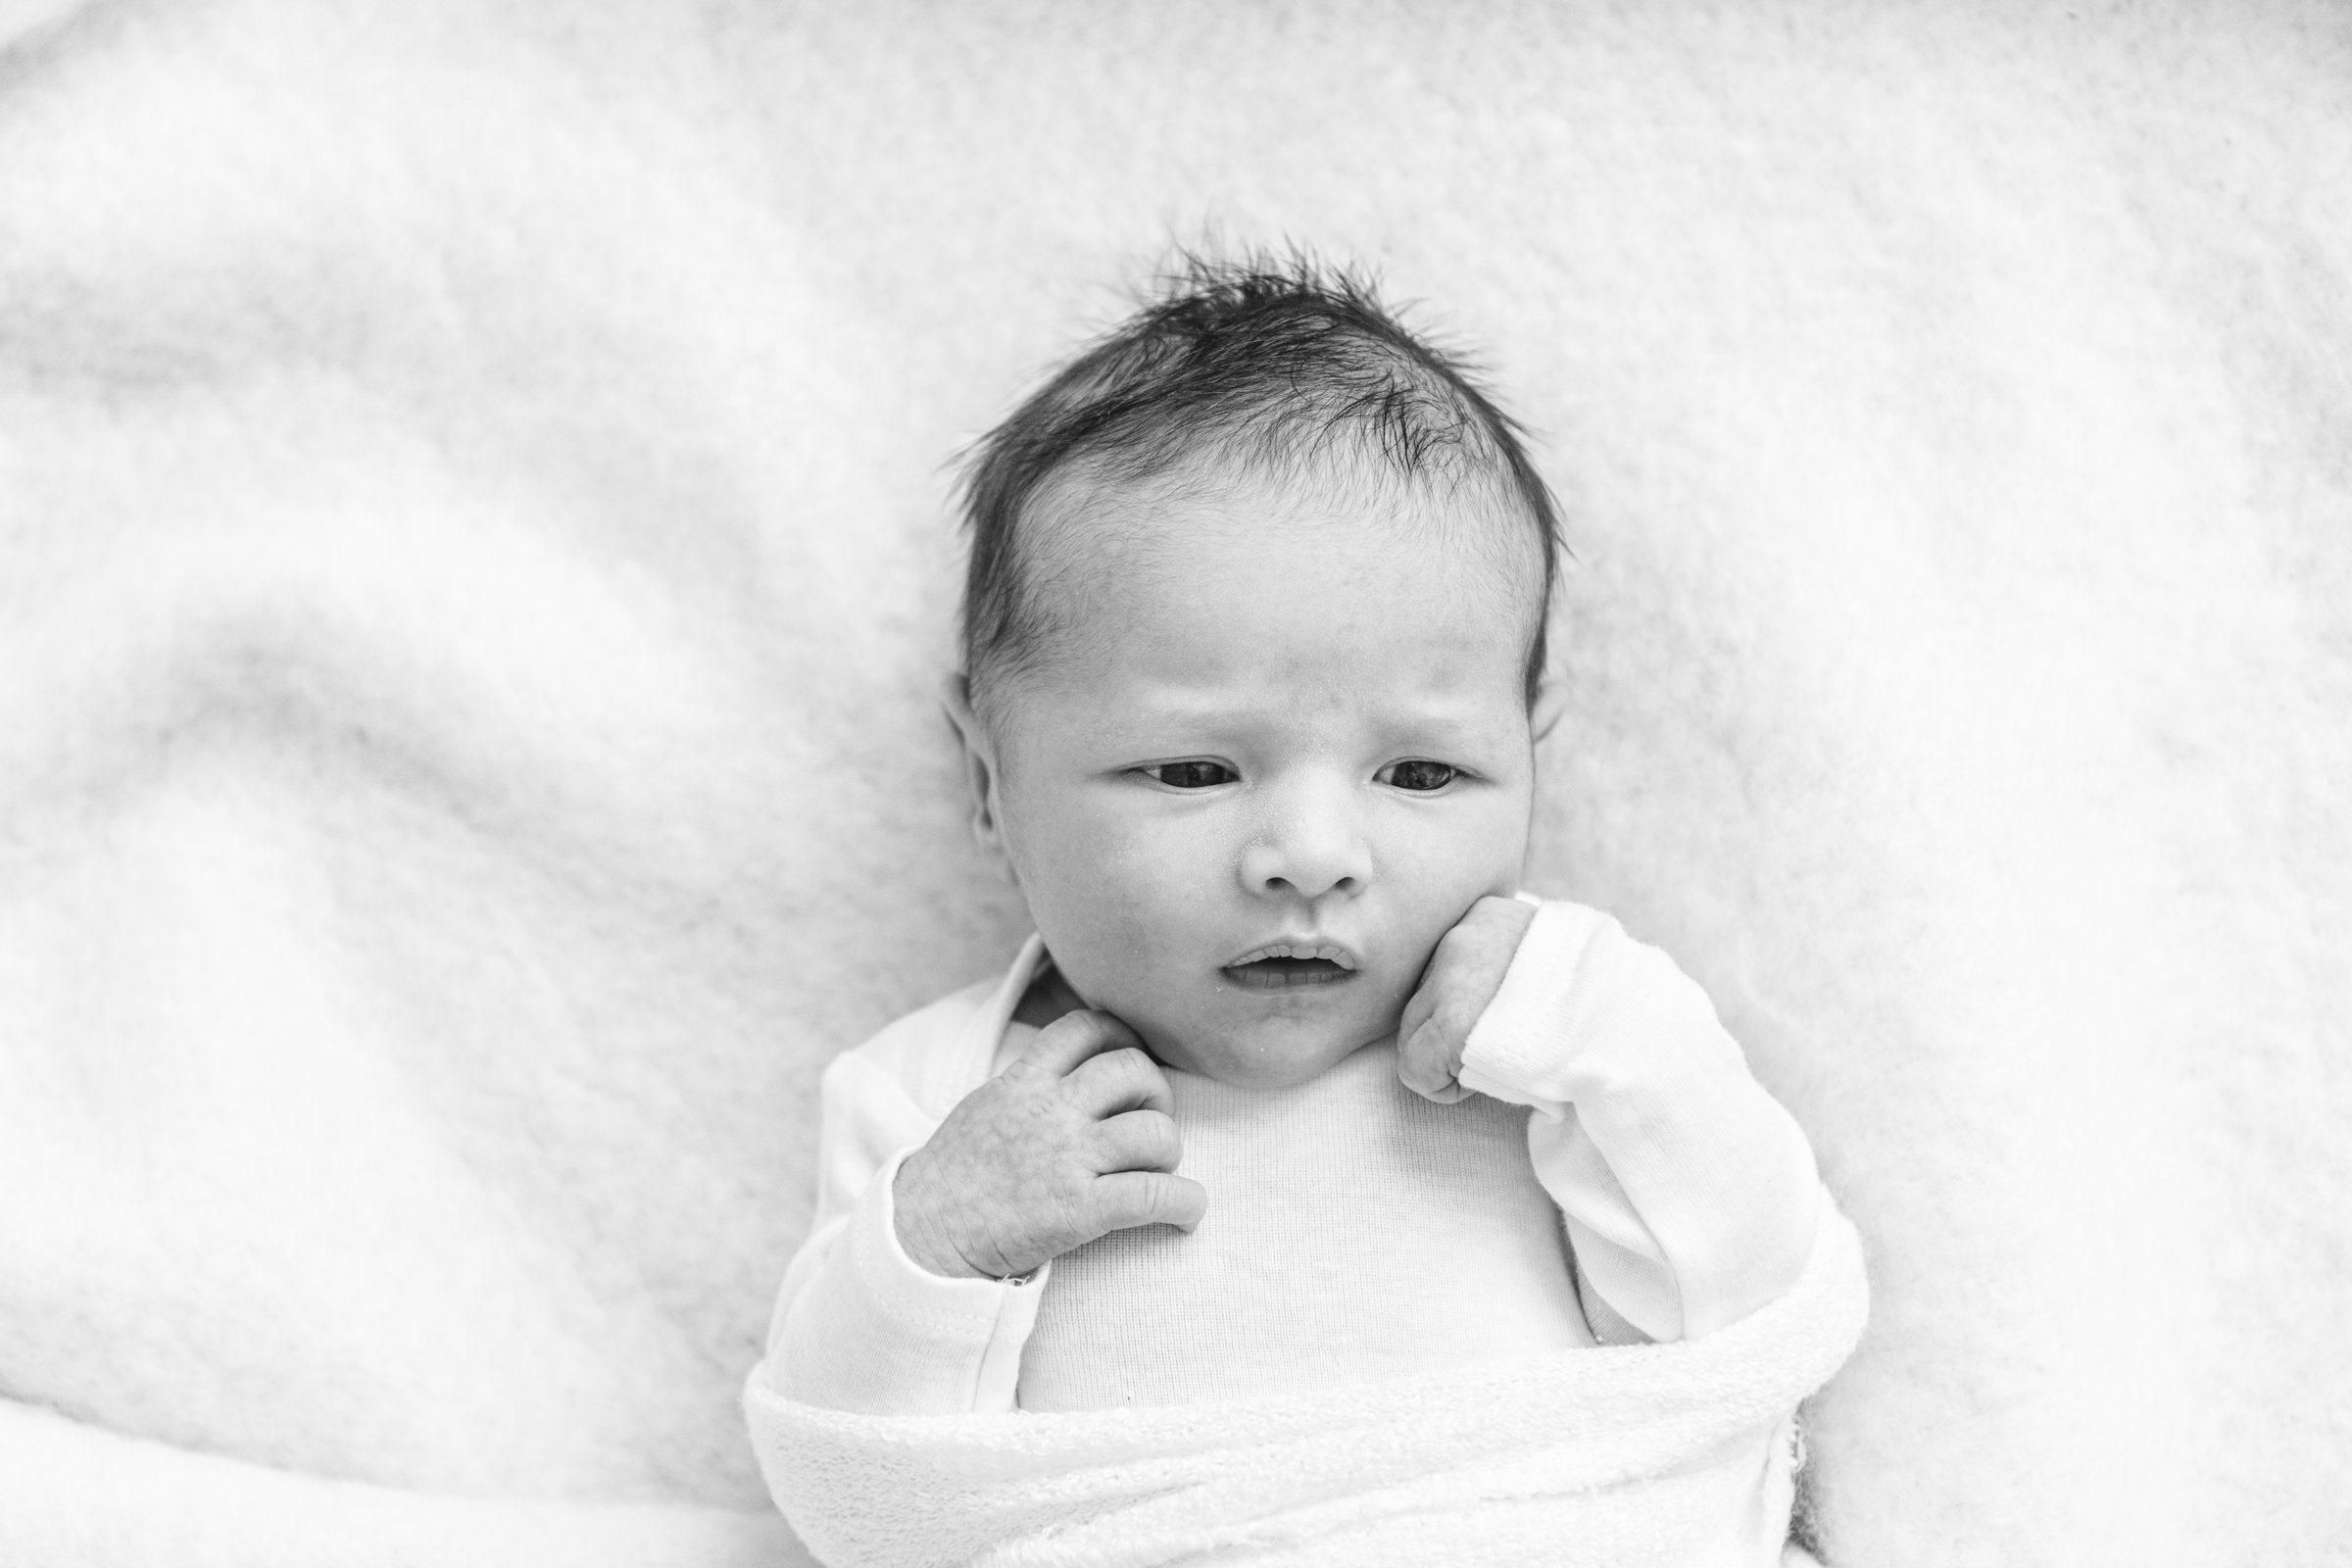  Baby girl with eyes wide open and fists next to her face captured by Nicole Hawkins Photography a professional photographer in Hoboken, New Jersey. baby girl baby with eyes open hands next to face baby on bed #nicolehawkinsphotography #nicolehawkins